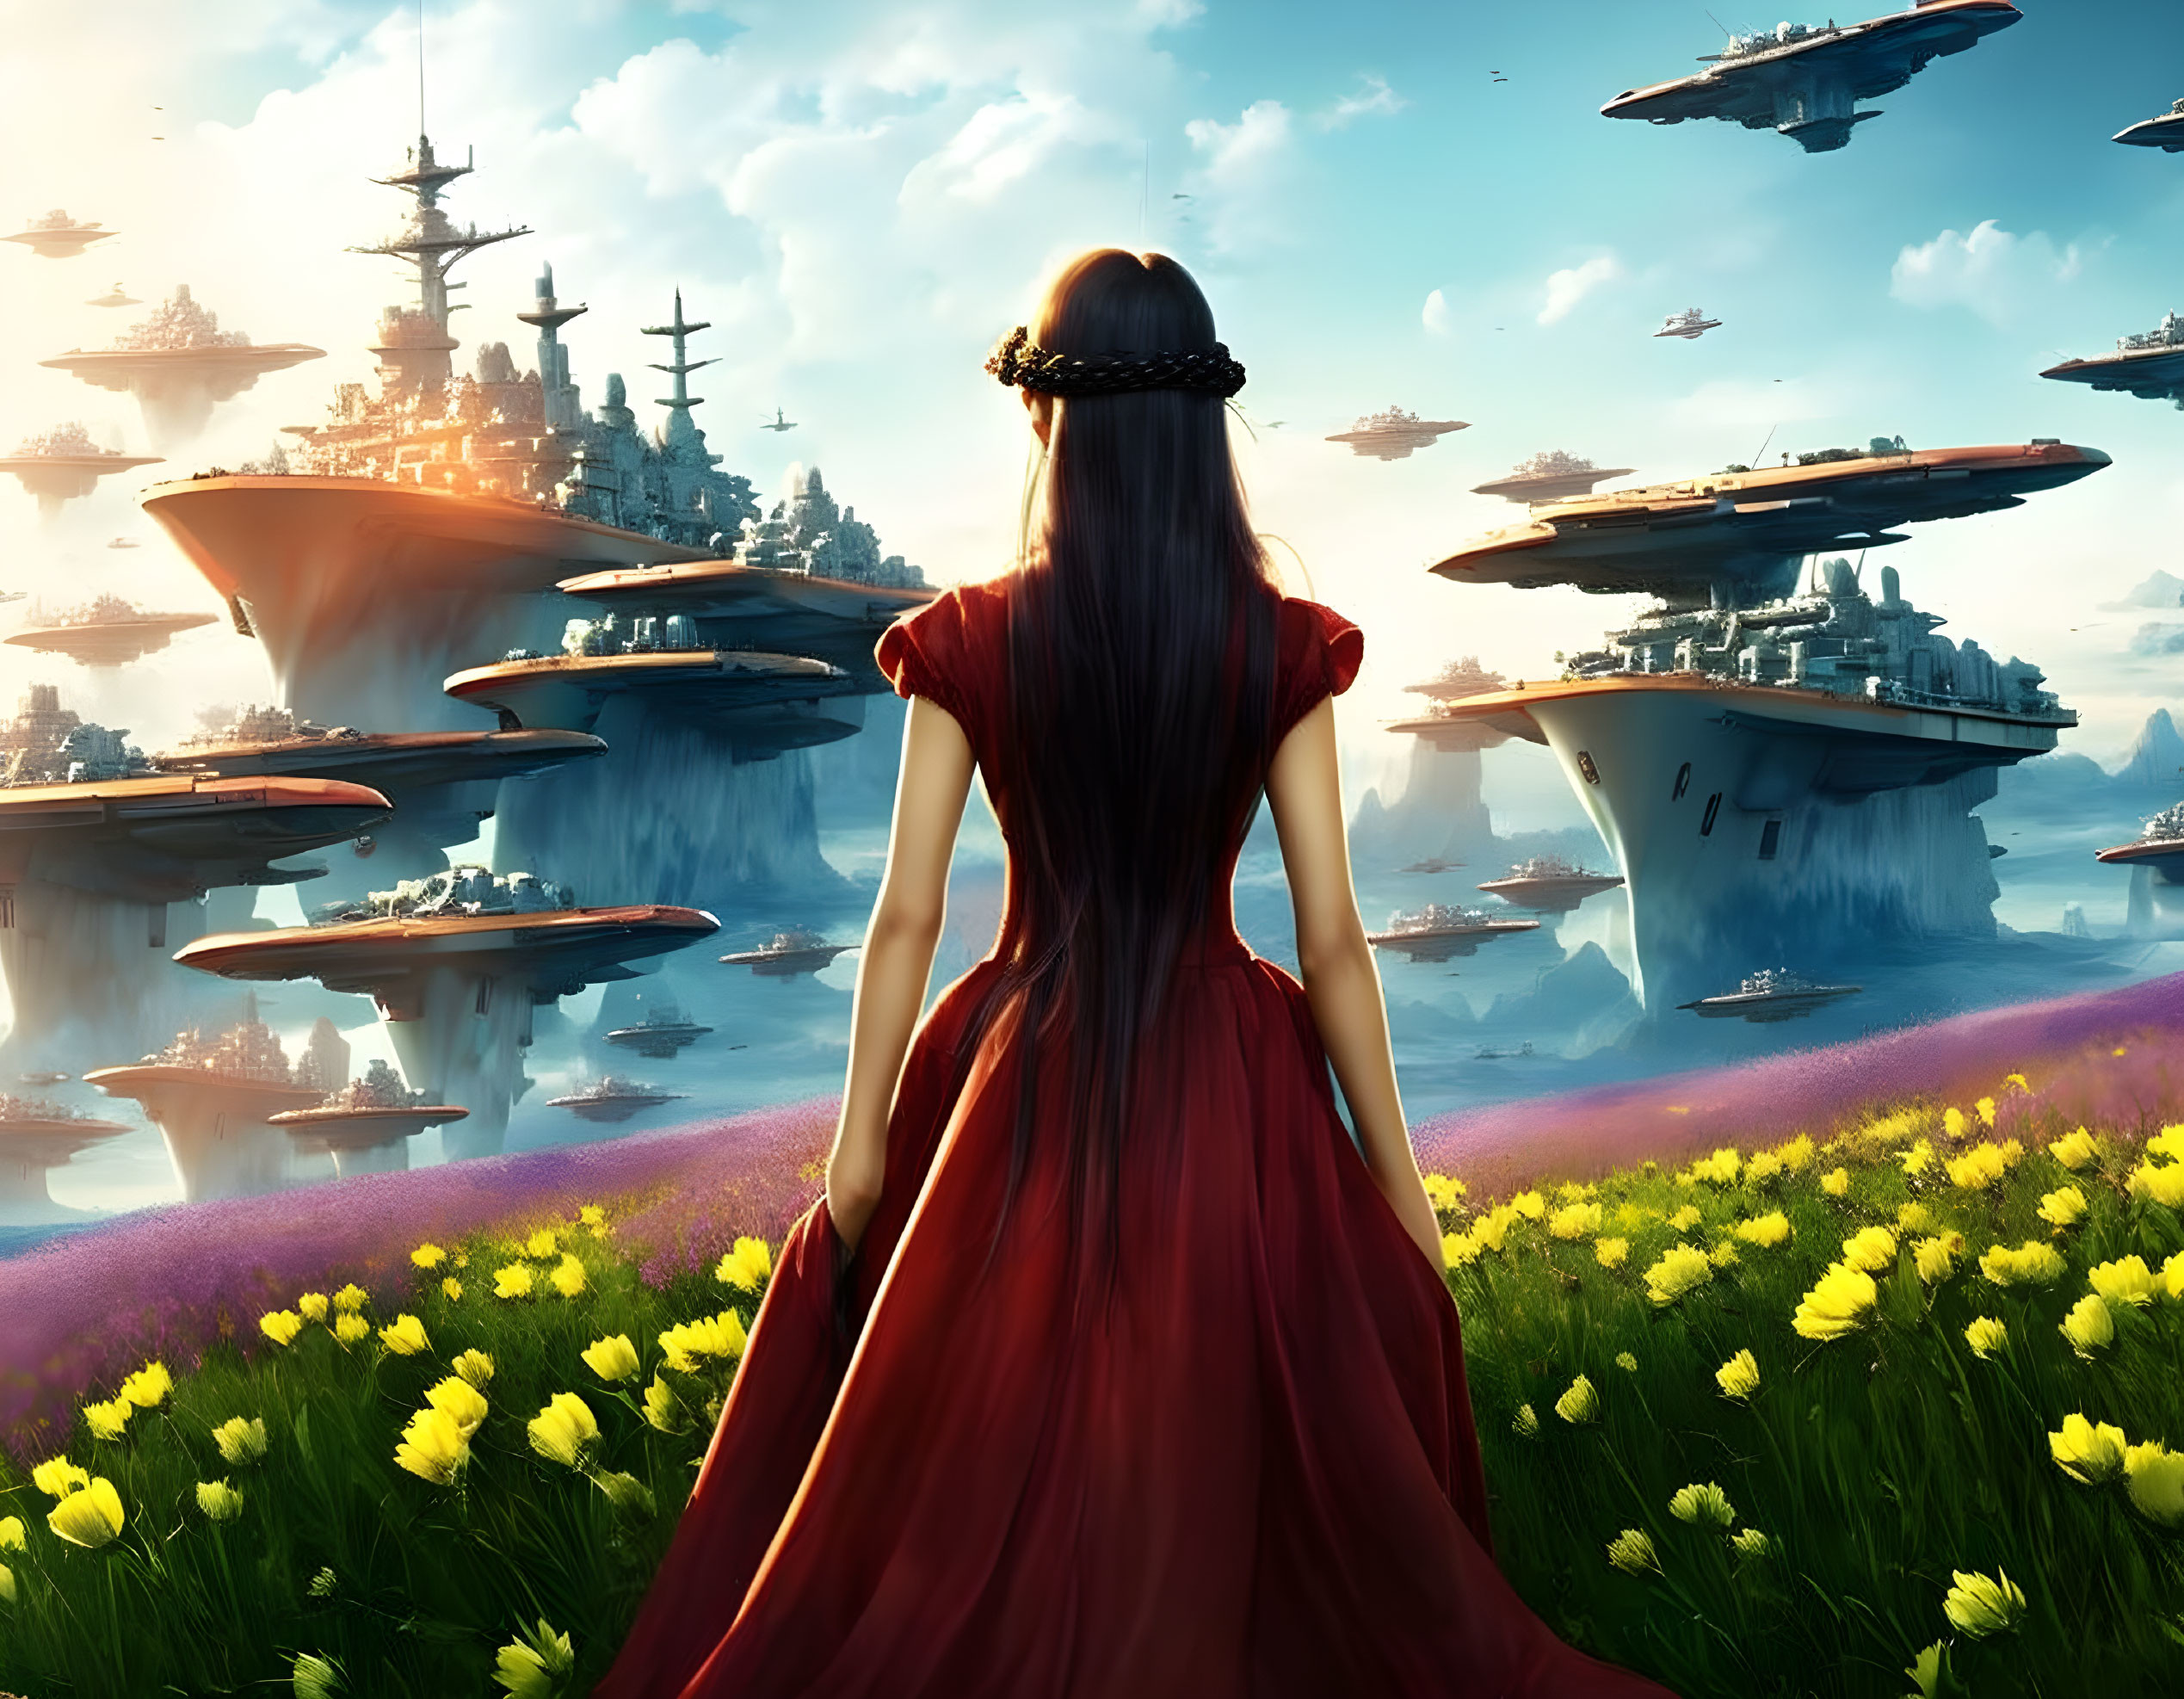 Woman in red dress admires futuristic airships in sunset sky